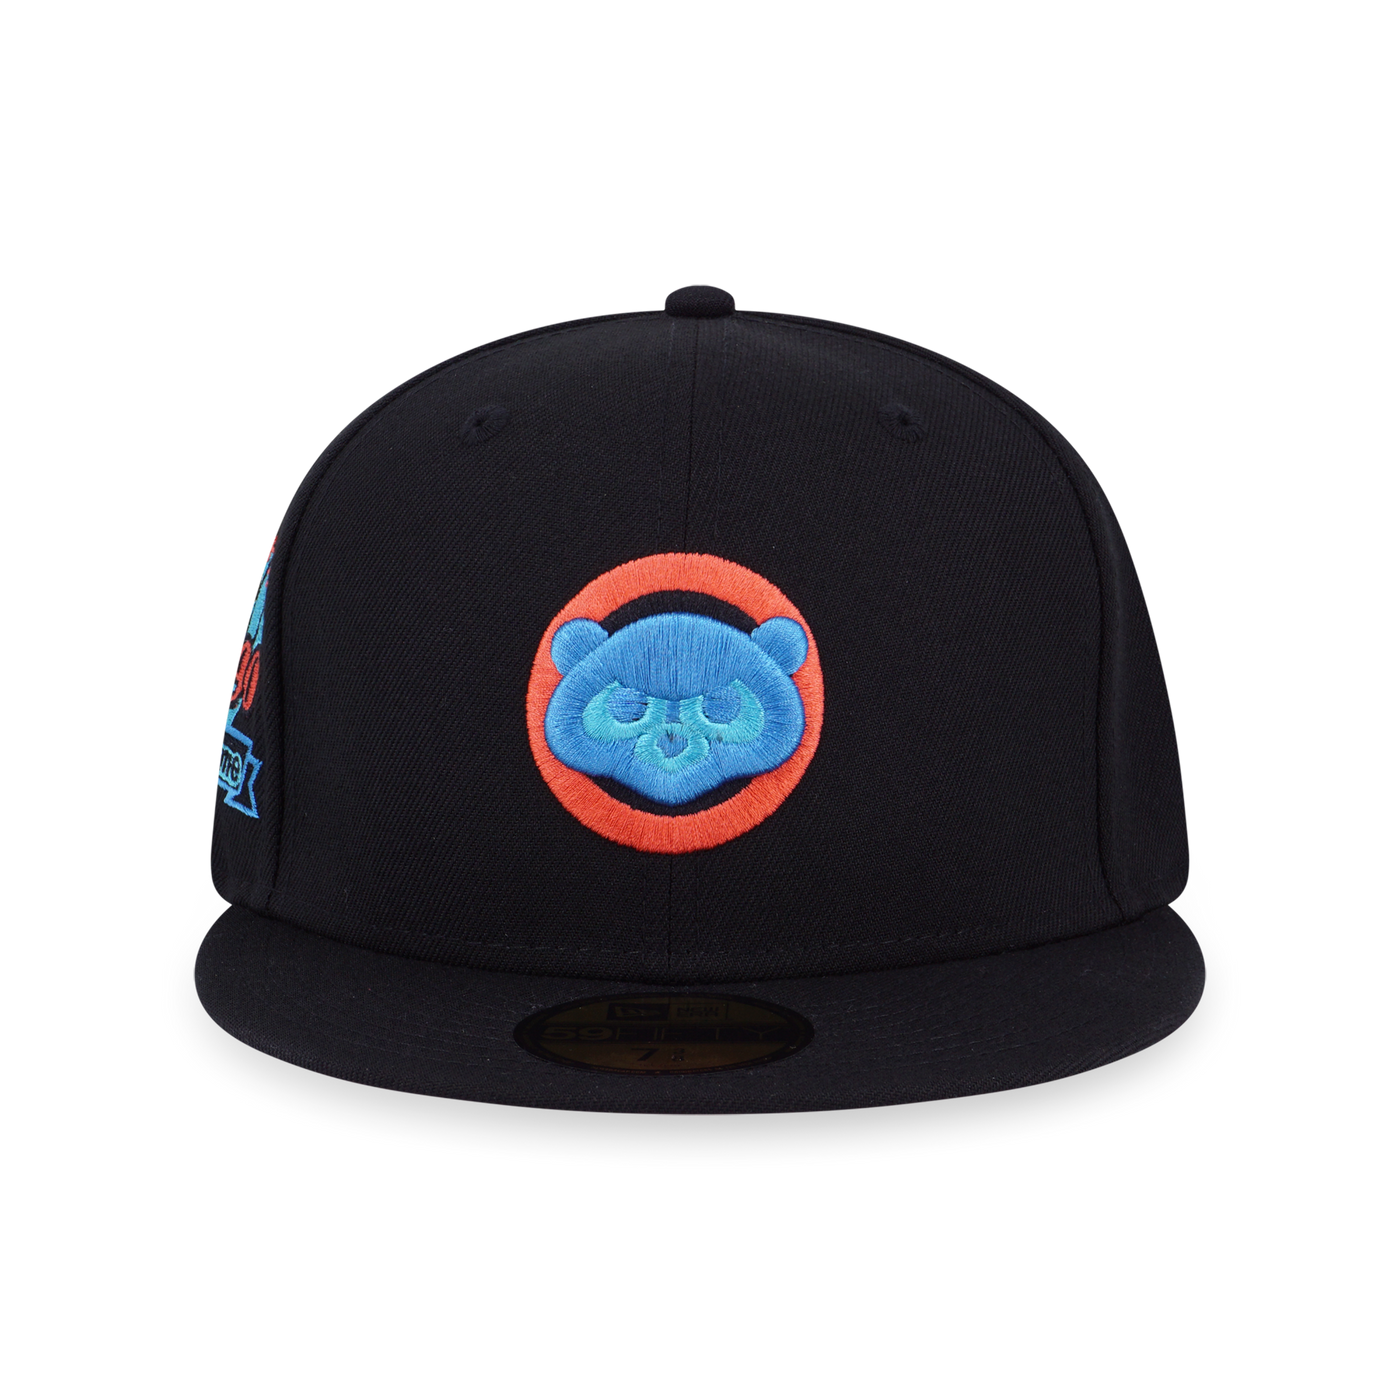 59FIFTY PACK - NEON CHICAGO CUBS BLACK 59FIFTY CAP